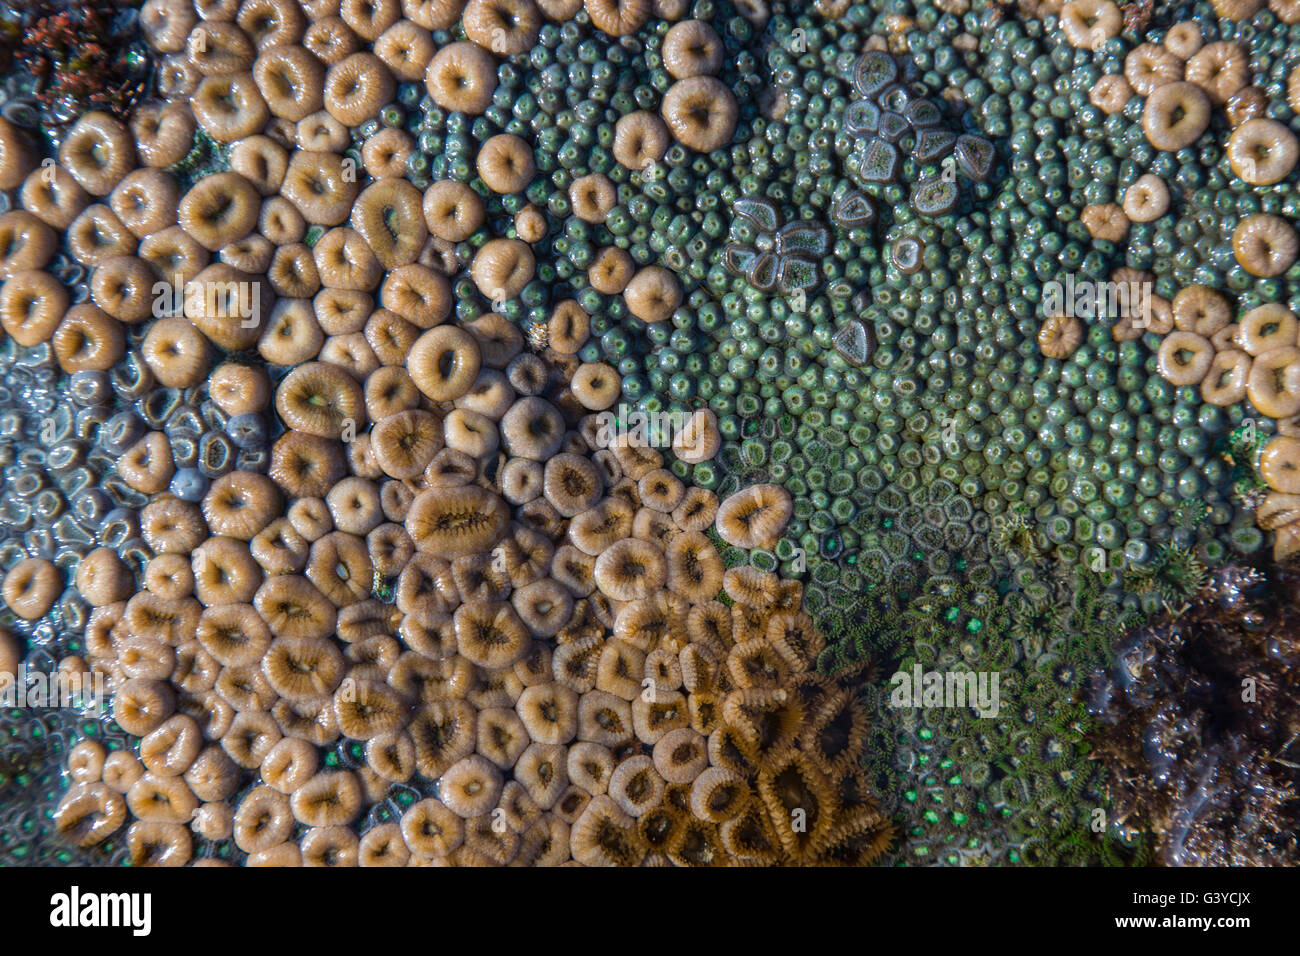 Various Zoanthids or soft coral on the rocks in the inter-tidal zone in Mozambique Stock Photo